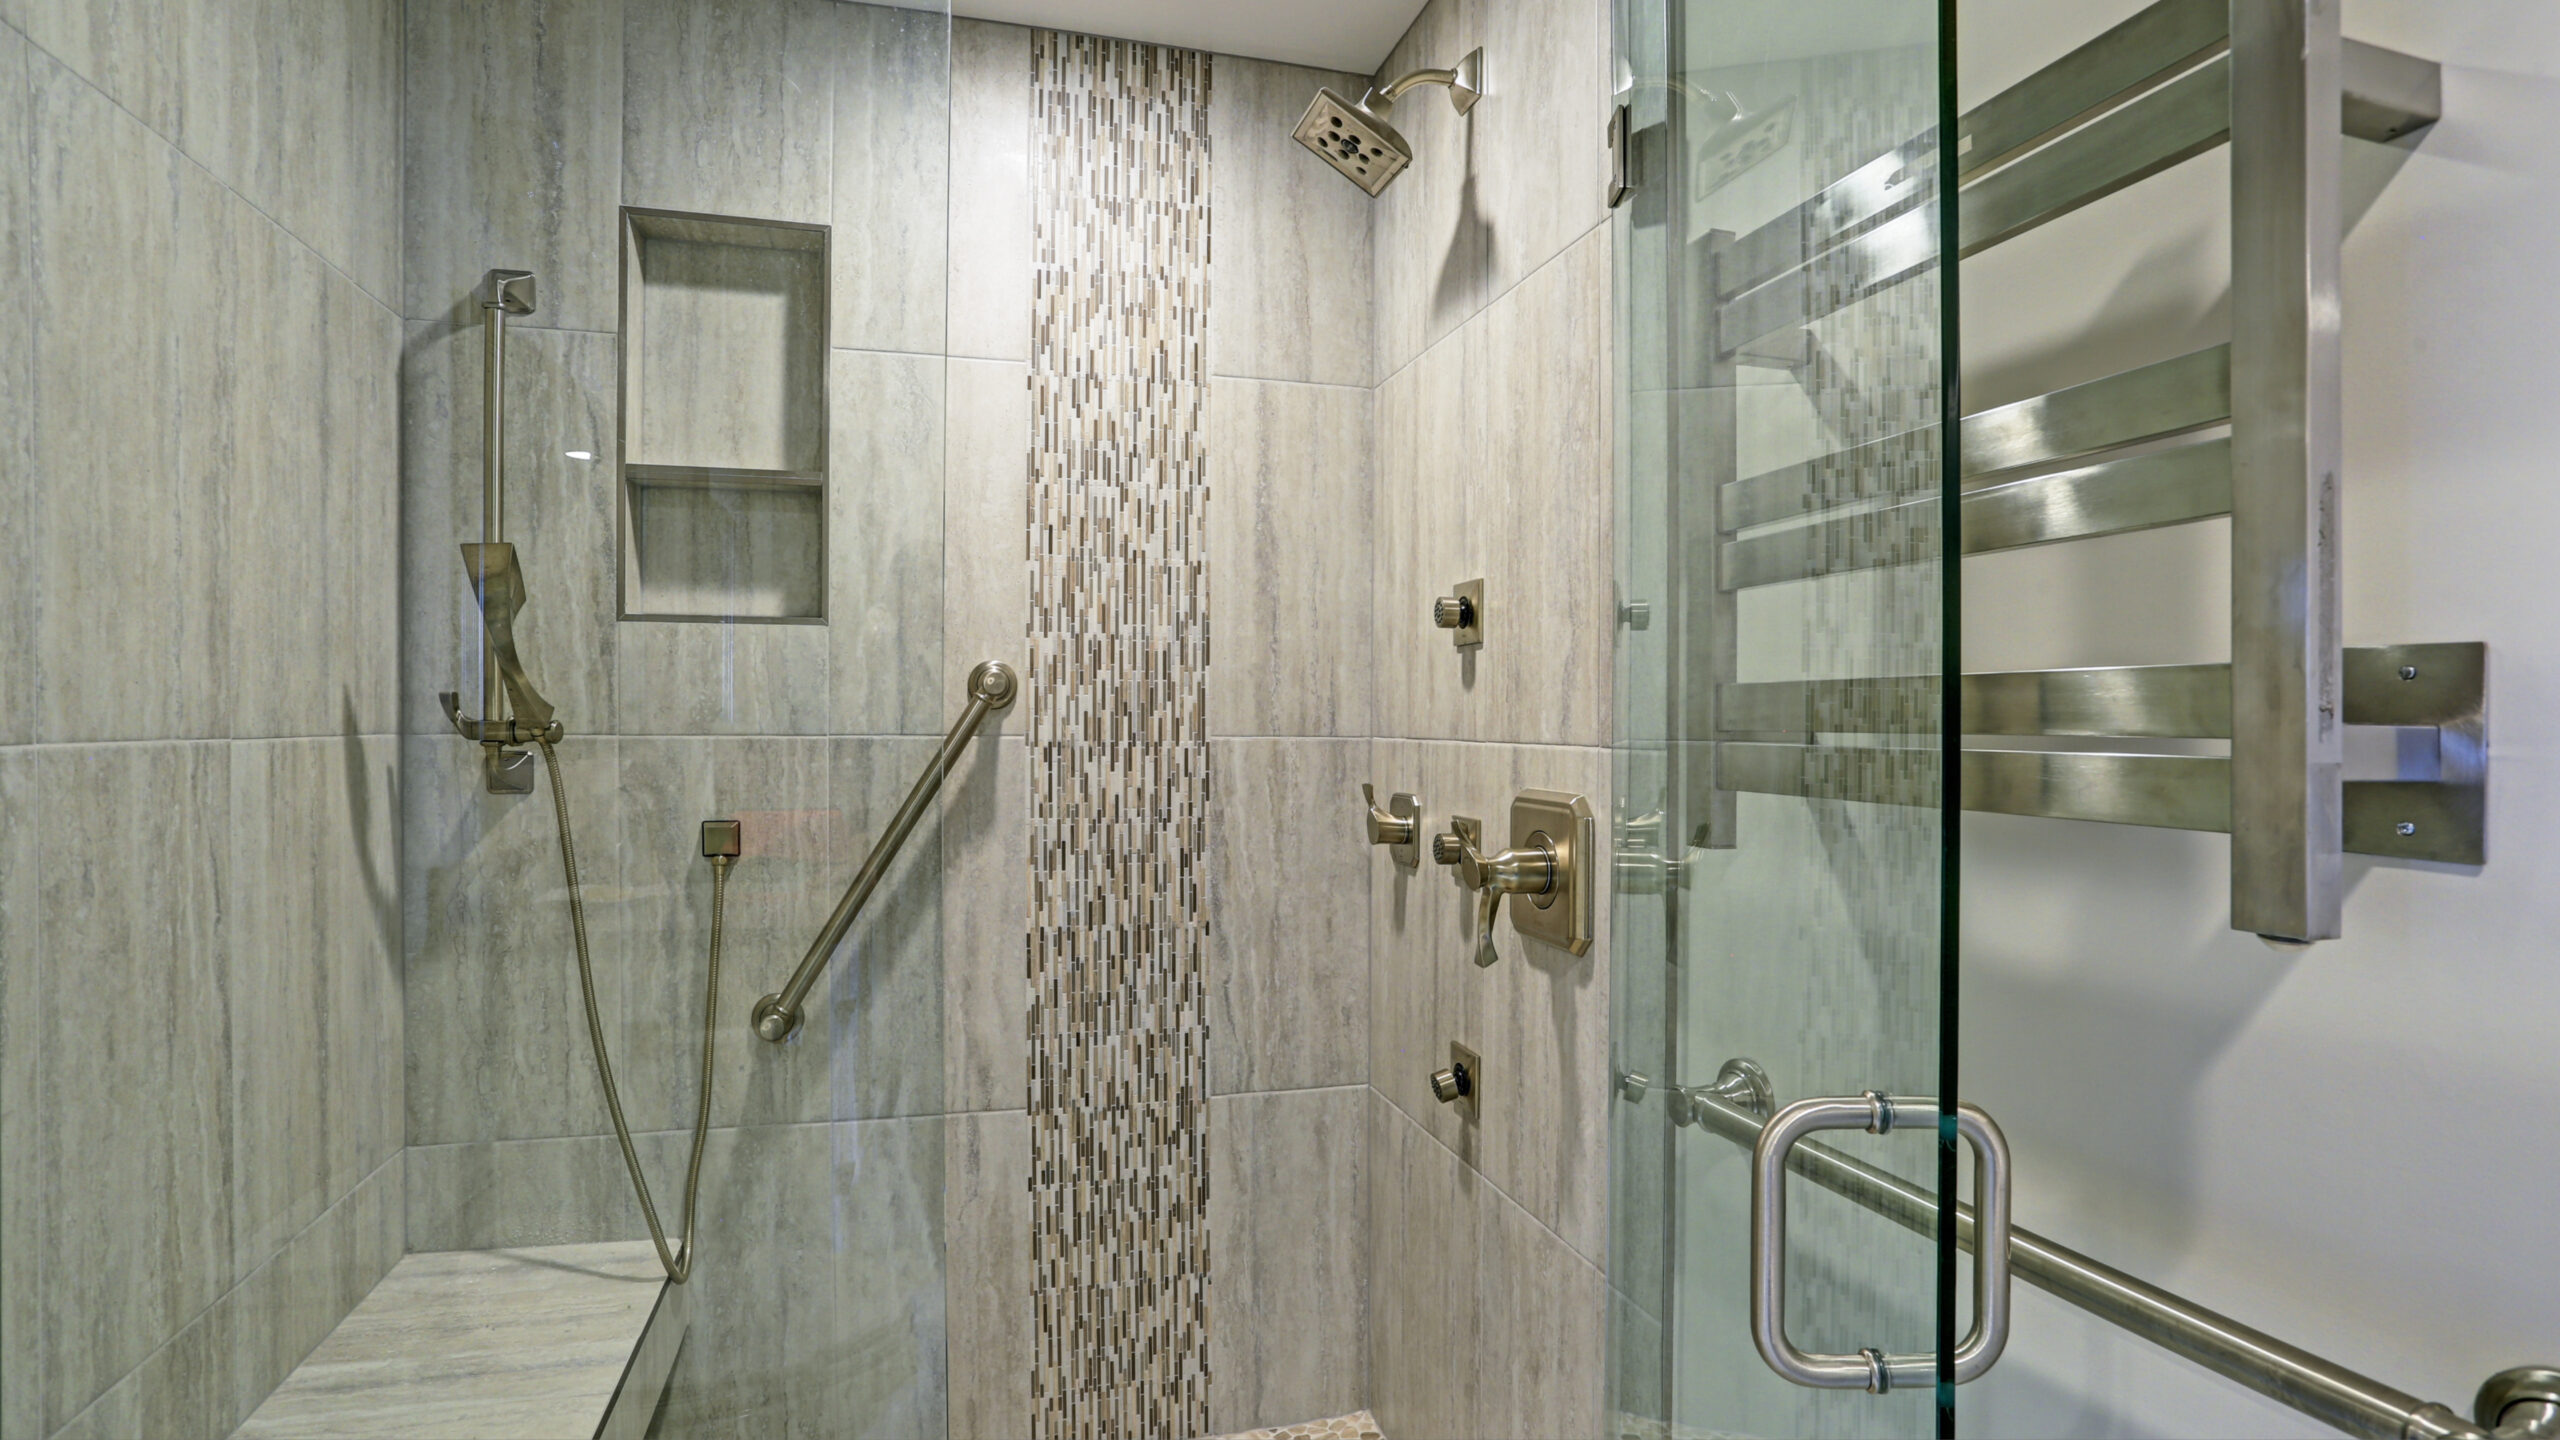 A walk-in shower with gray wall surrounds, grab bars, and built-in shelving